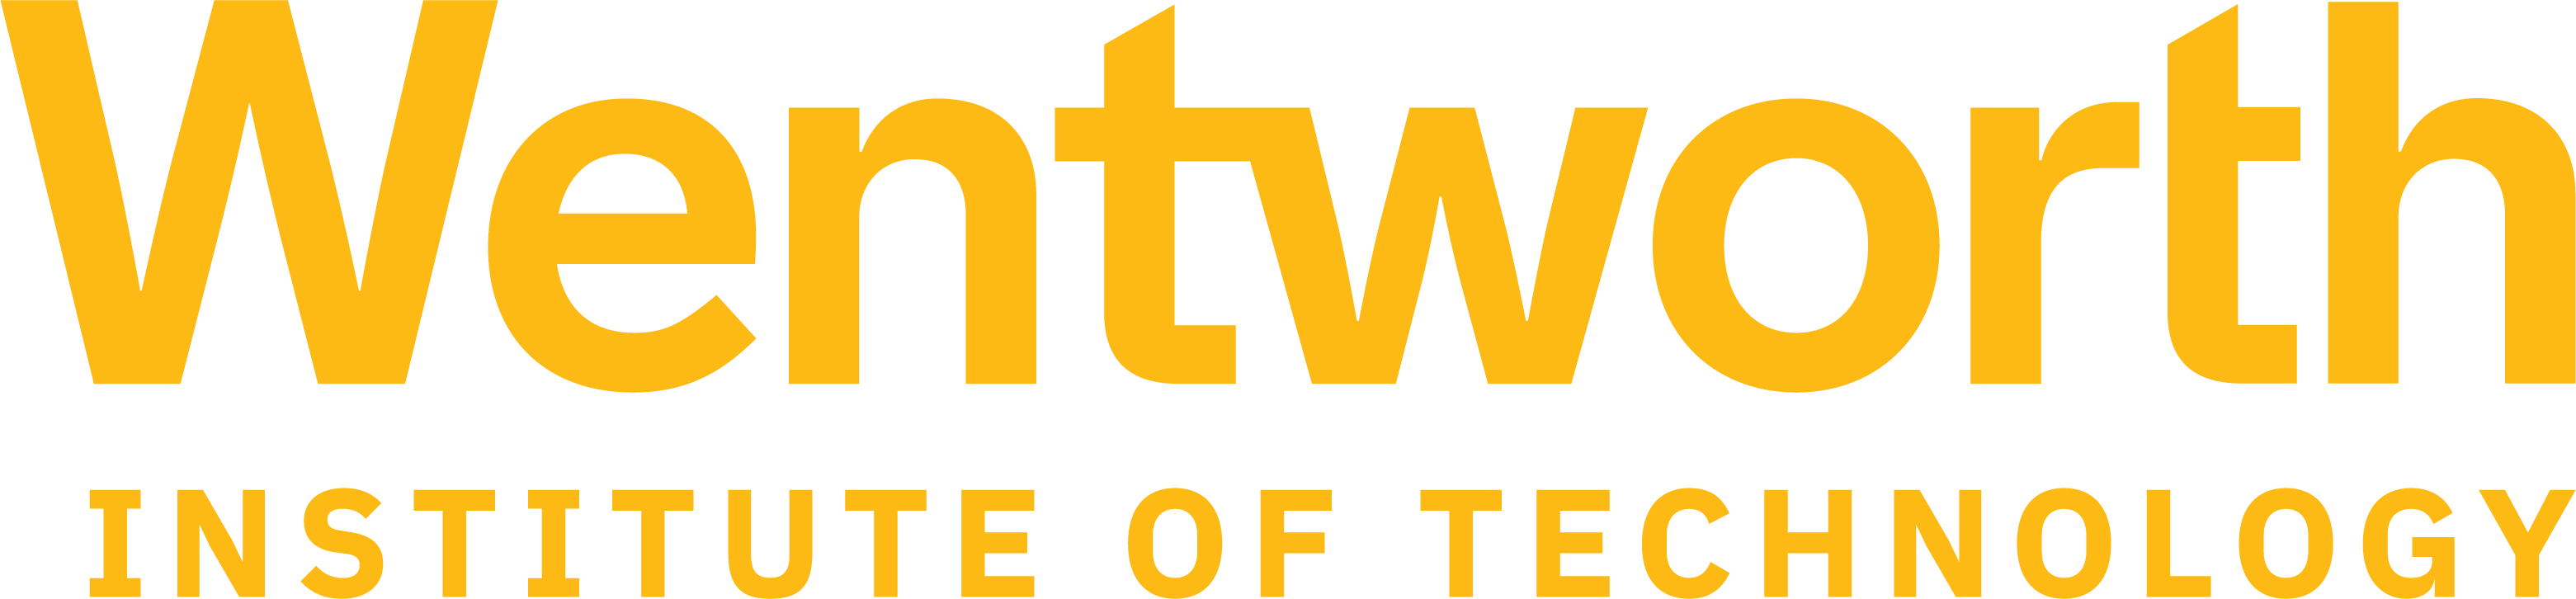 Wentworth Institute of Technology Logo - Click here to go back to home